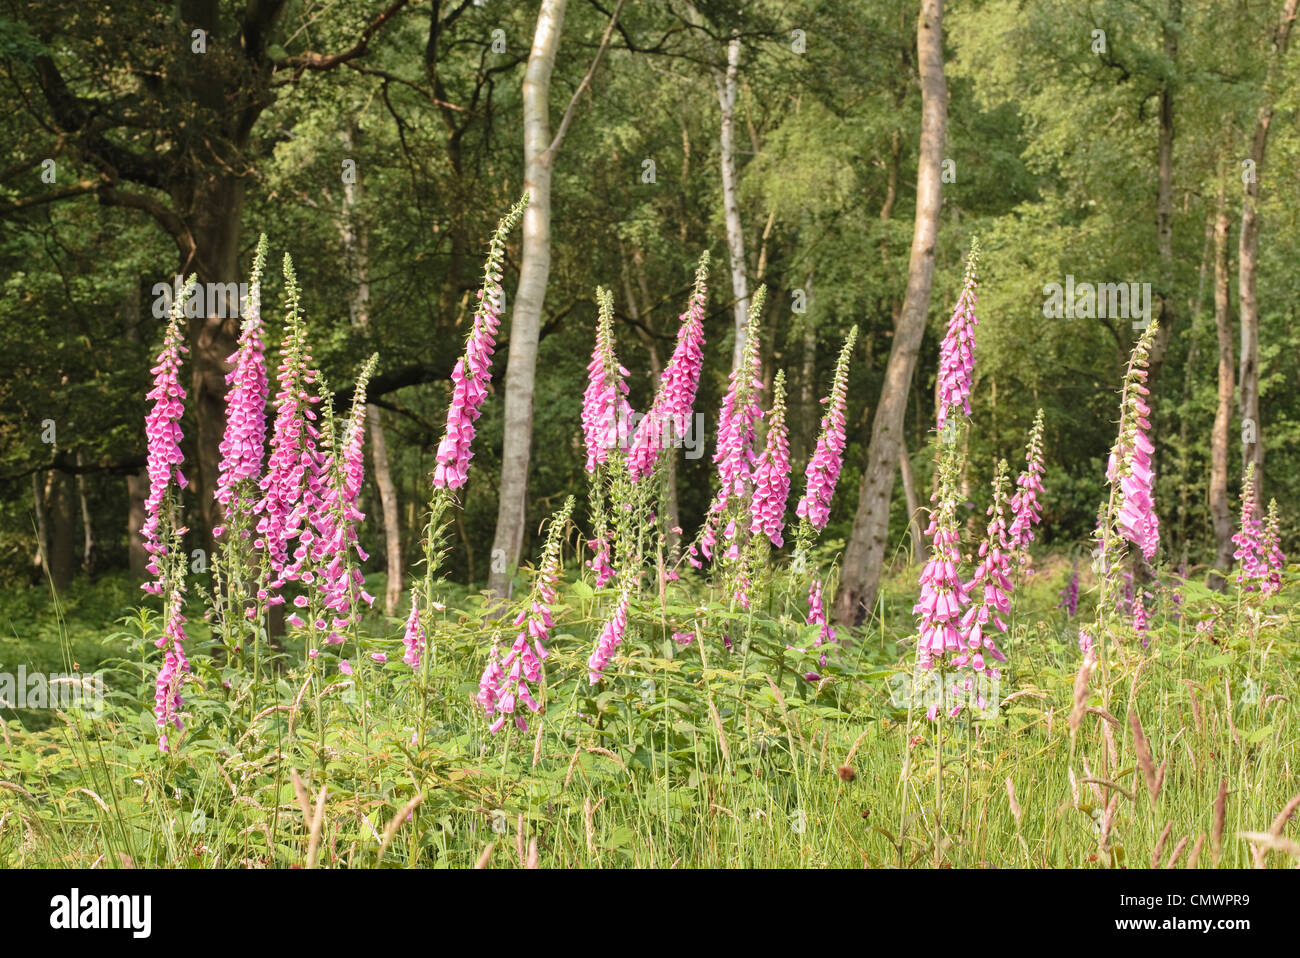 Wild foxglove flowers in a forest clearing Stock Photo